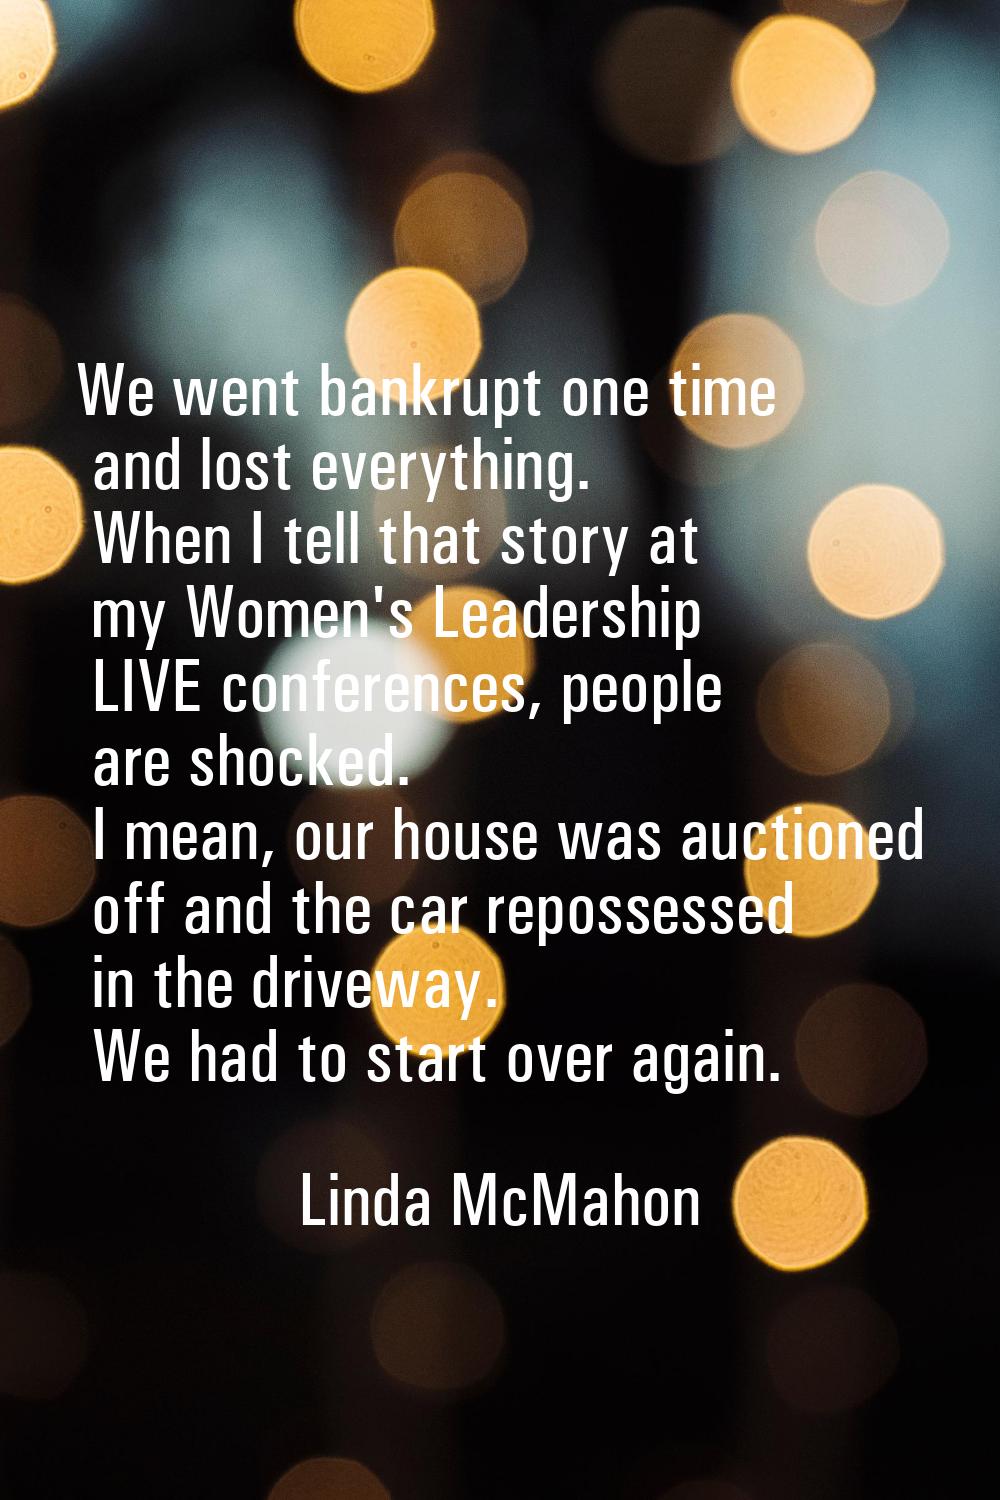 We went bankrupt one time and lost everything. When I tell that story at my Women's Leadership LIVE